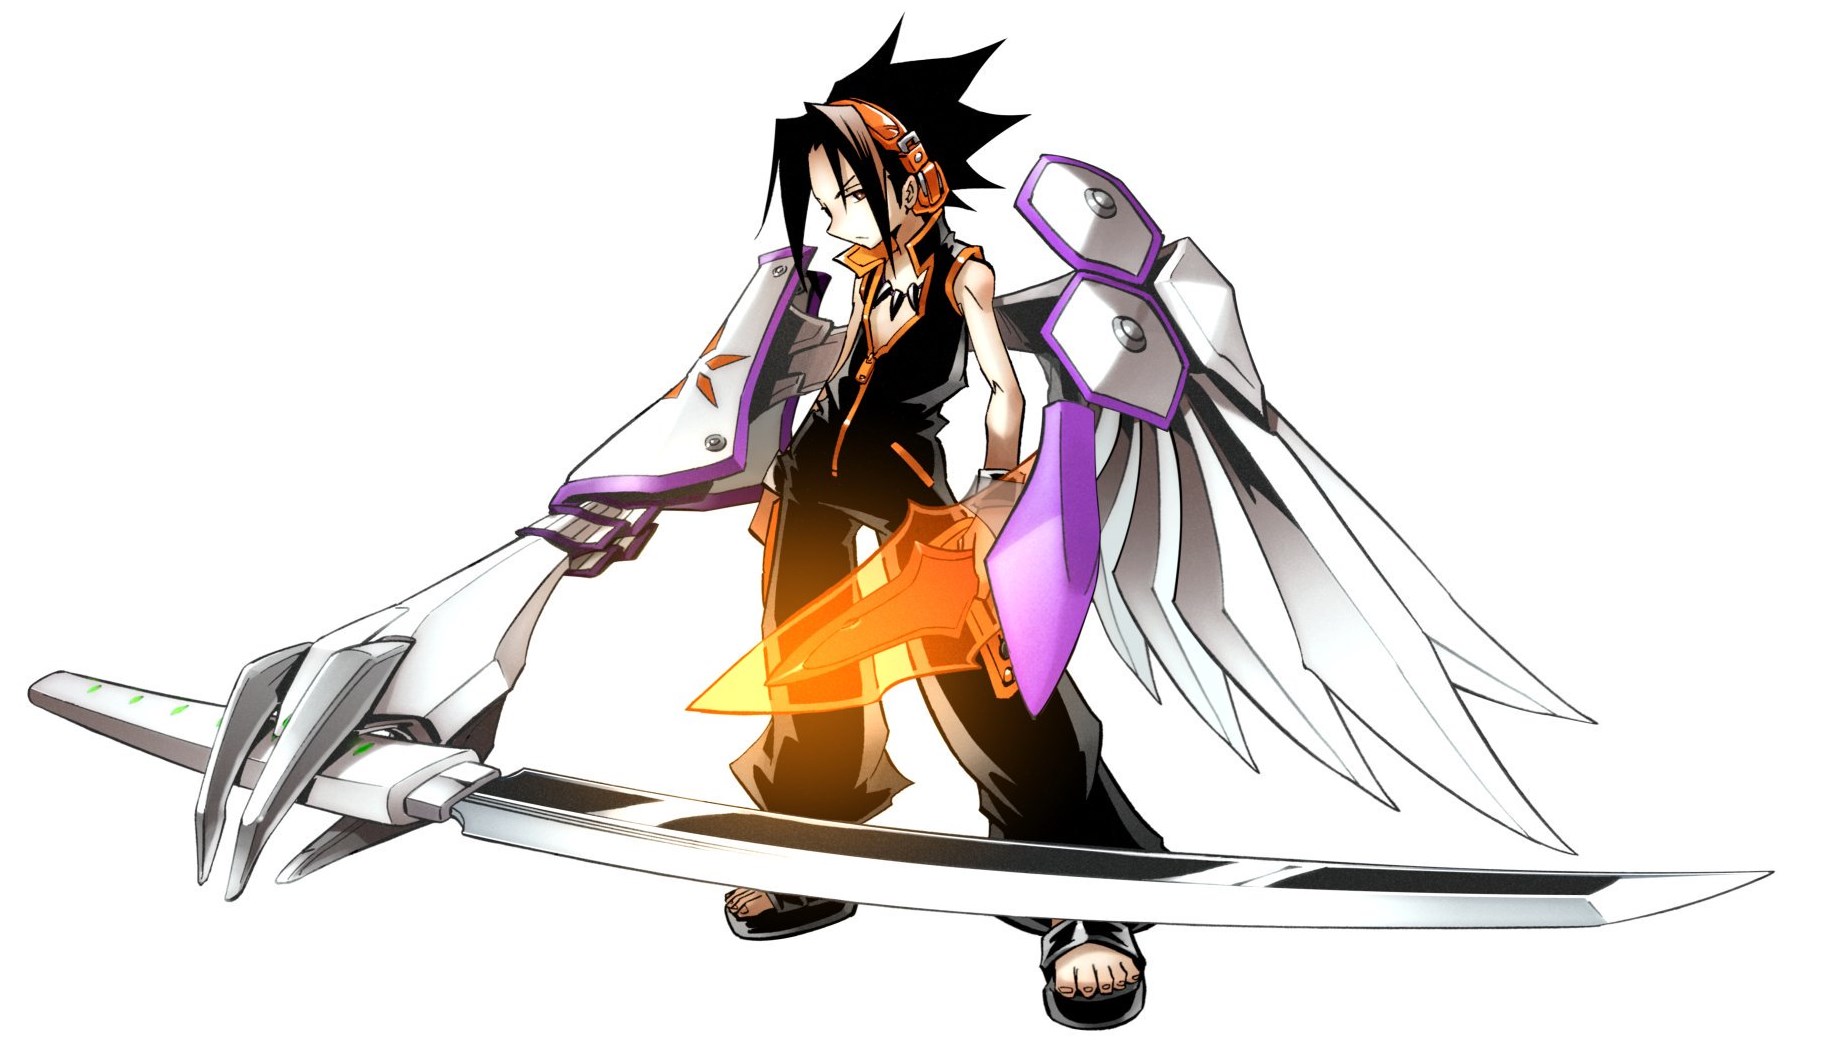 Everything will work out for Yoh Asakura in DB! by vh1660924 on DeviantArt